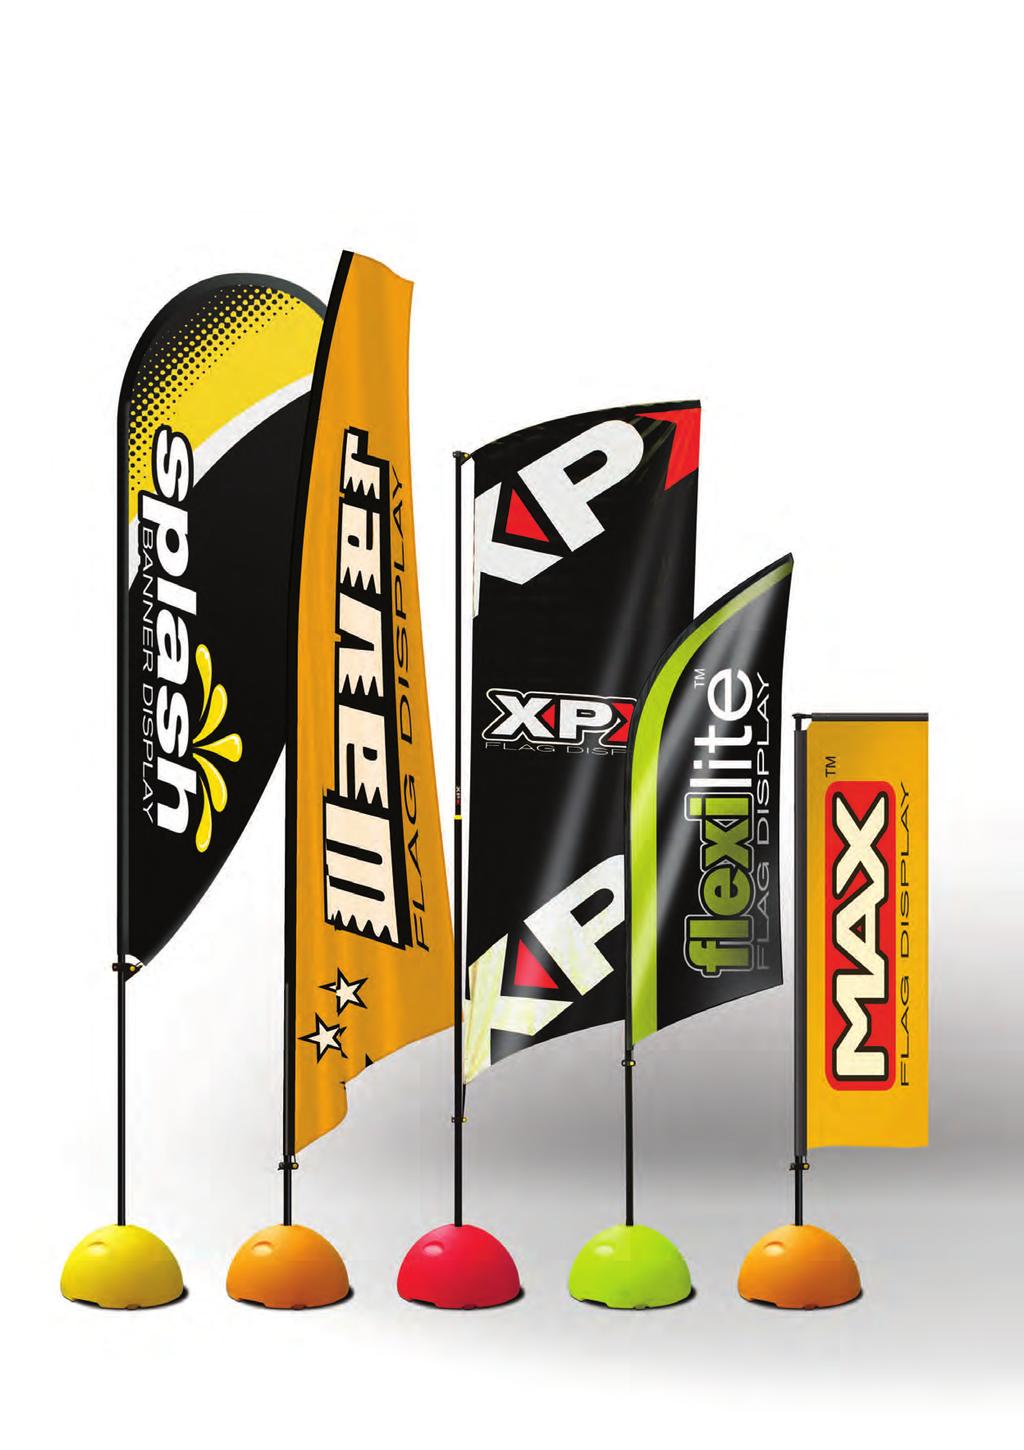 Portable Flag & Banner Display Range Our popular Euro Range is a new generation of high quality flag and banner display systems designed to create eye